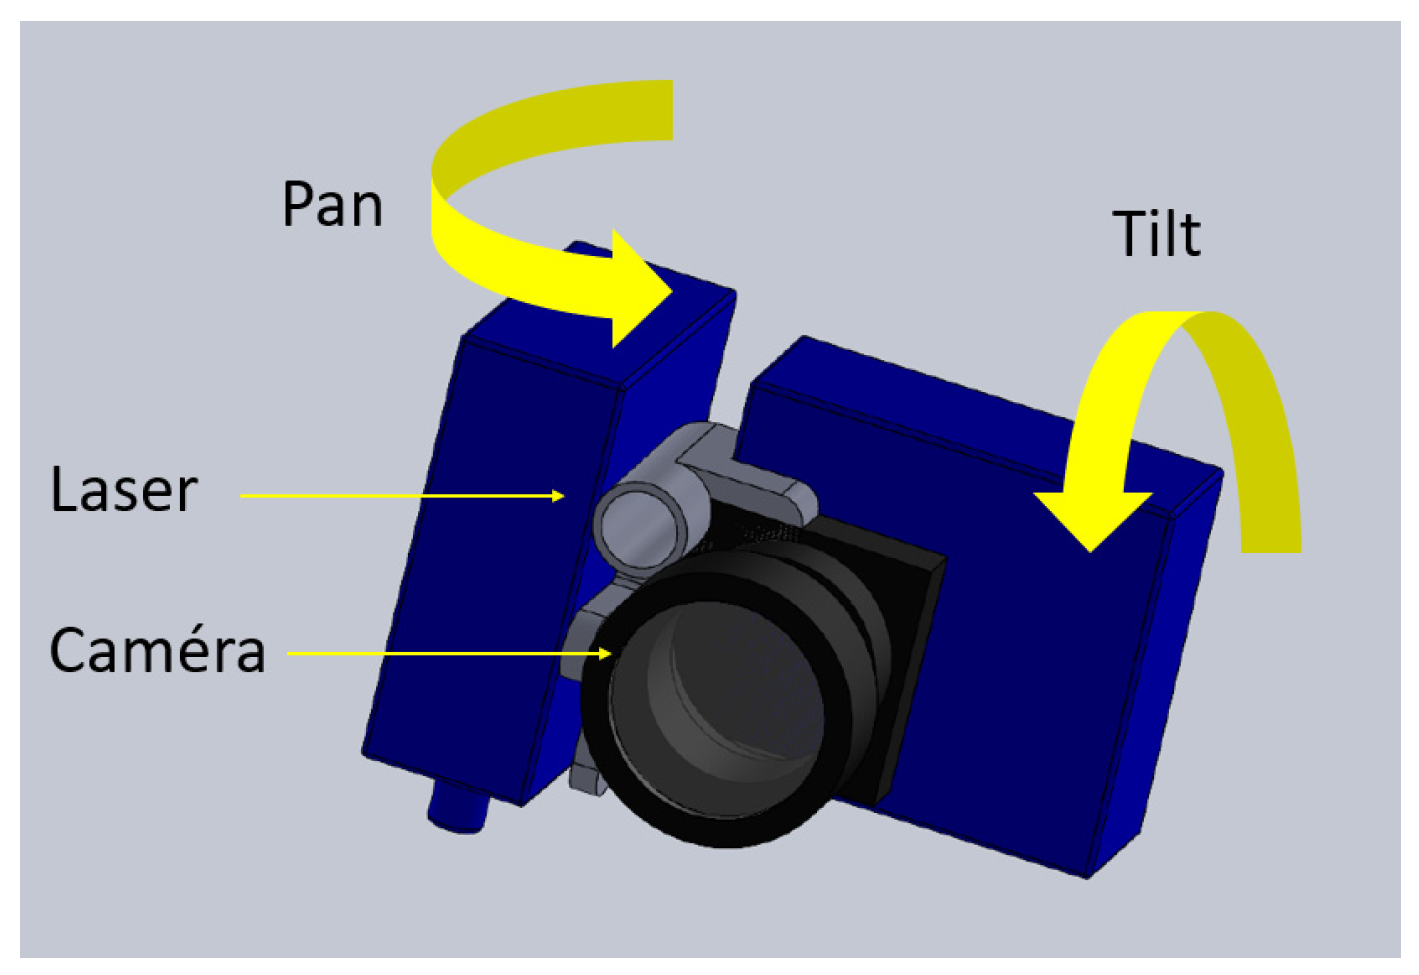 Fixation of the camera in the surgical focus.